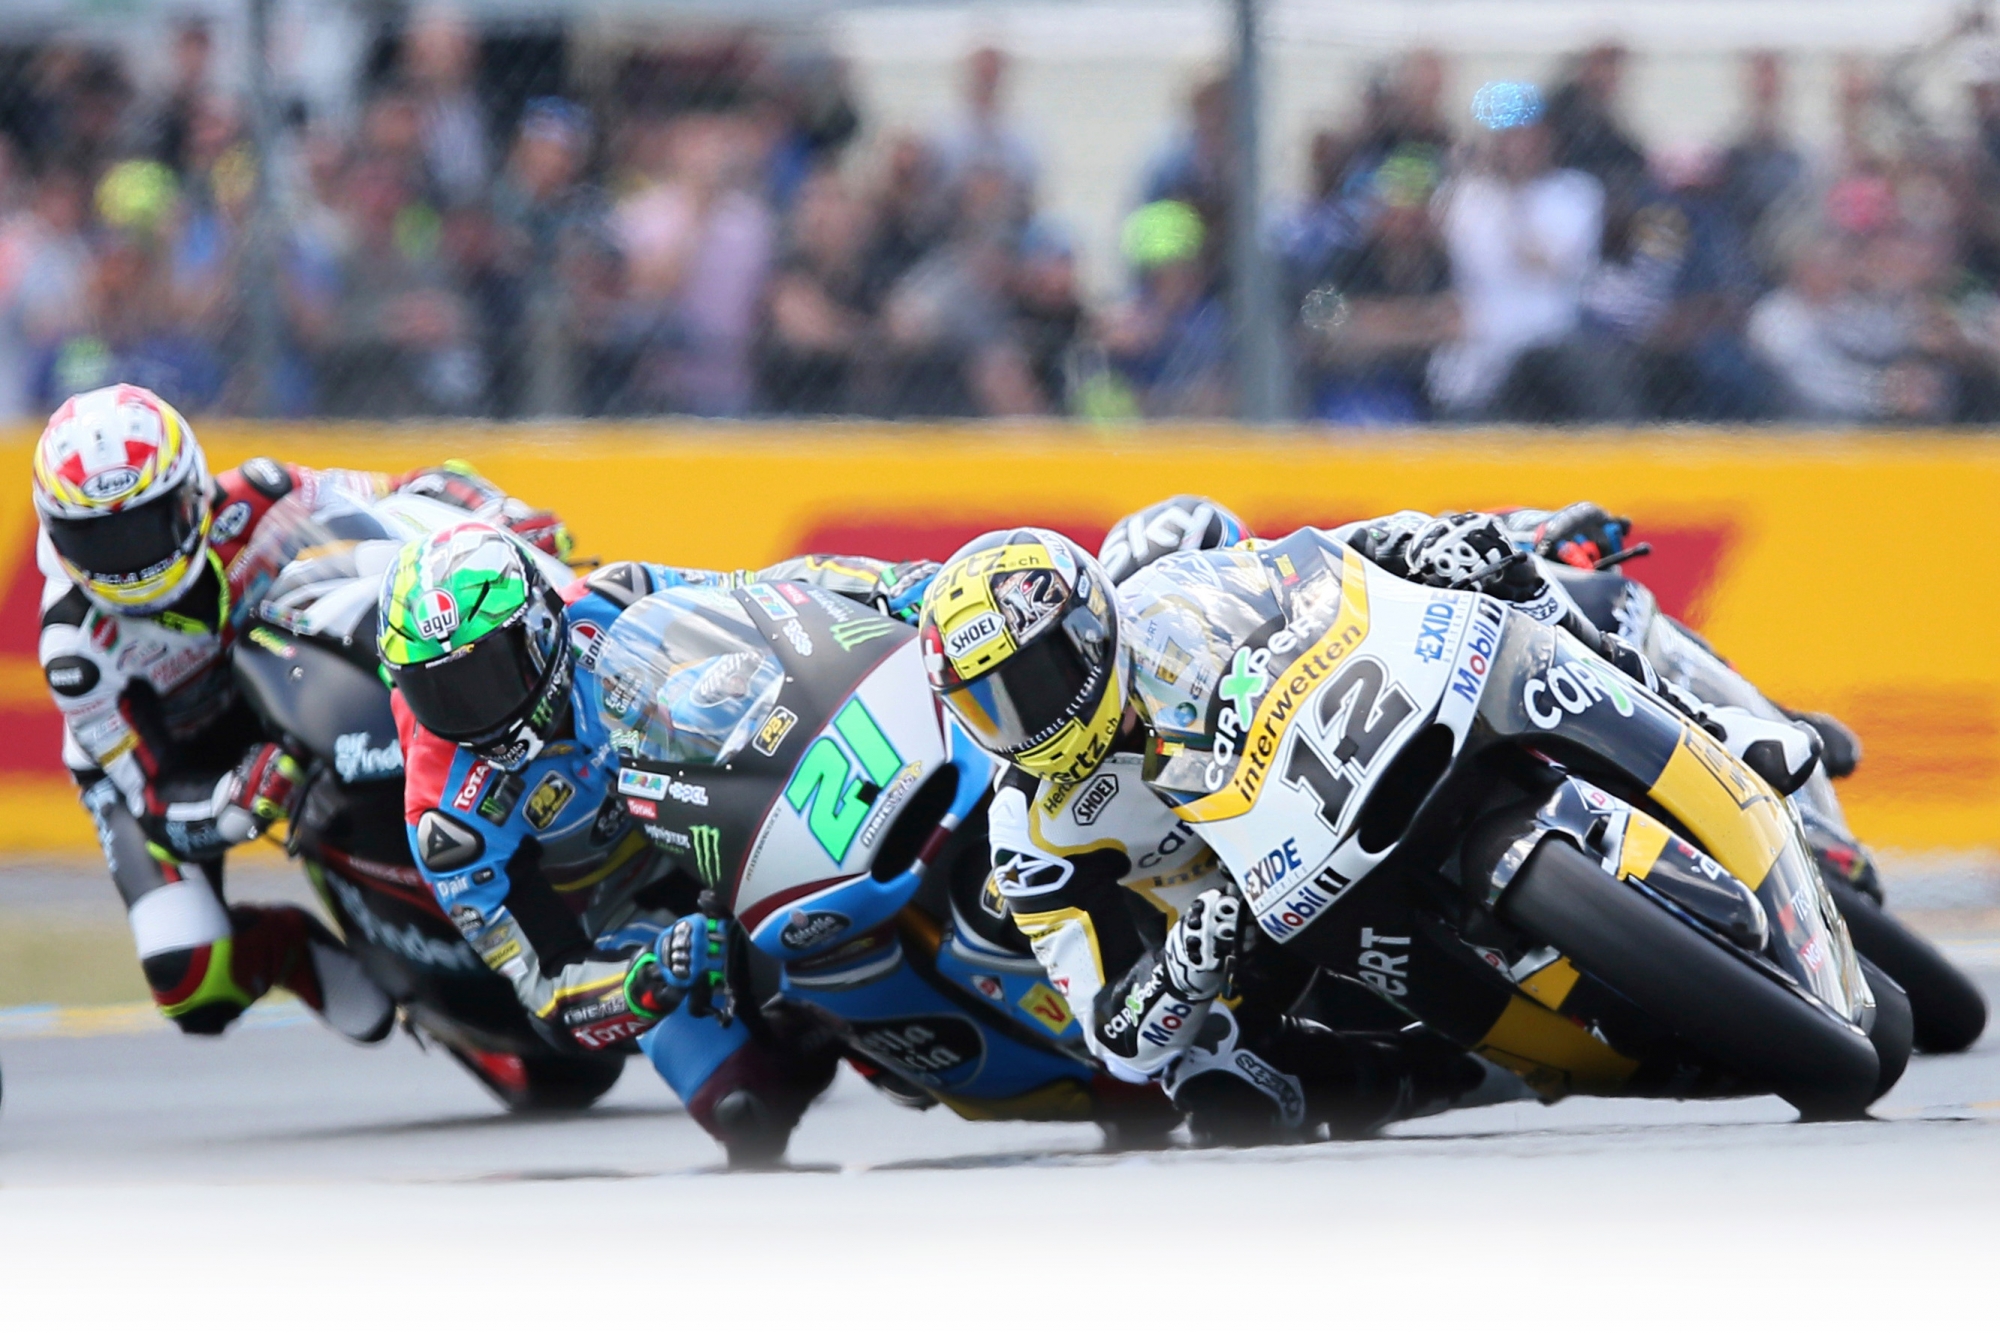 Moto2 rider Thomas Luethi of Switzerland, right, and Moto2 rider Franco Morbidelli of Italy, center, competes during the French Grand Prix's race, in Le Mans, western France, Sunday, May 21, 2017. (AP Photo/David Vincent) France GP Motorcycle Racing